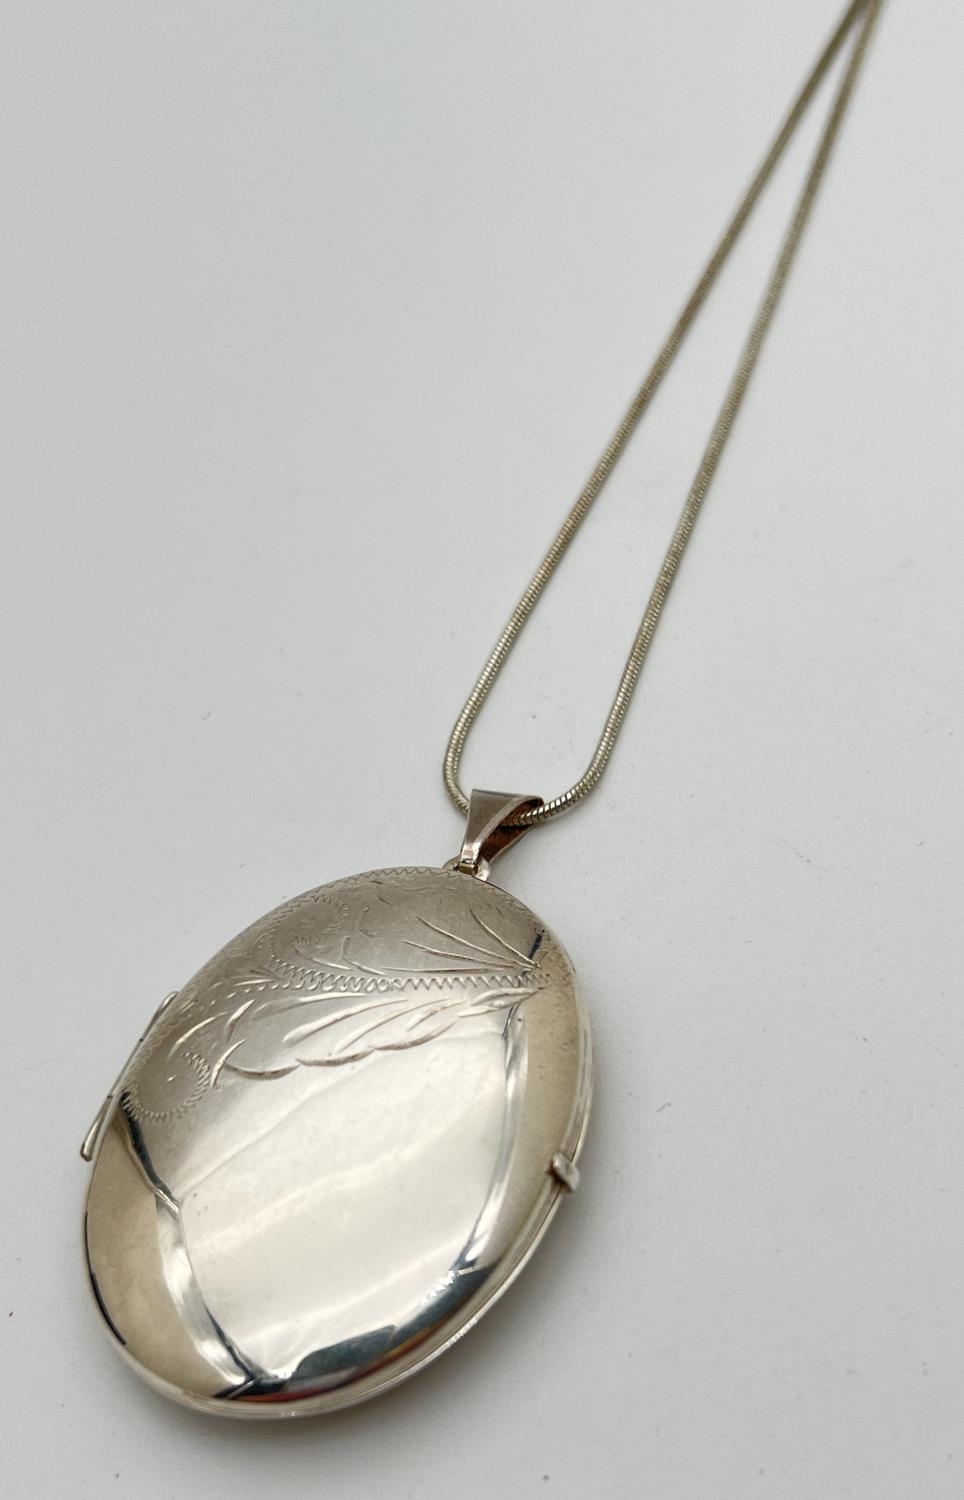 A large silver oval locket with engraved floral design to front. On a 22" snake chain with lobster